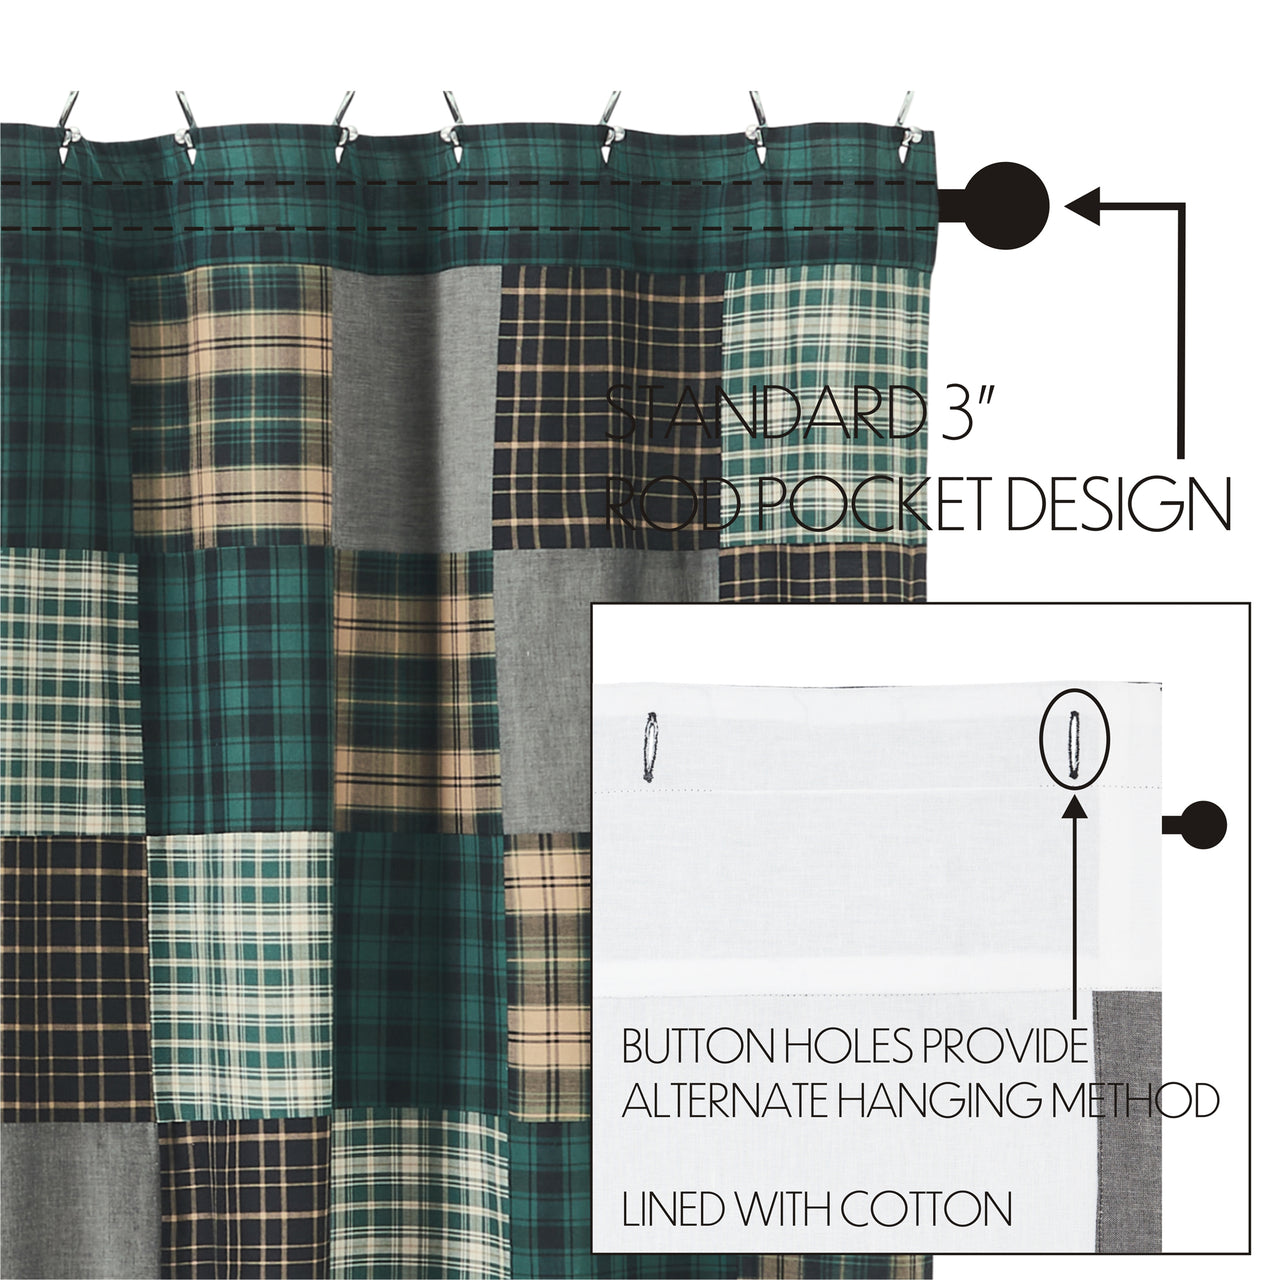 Pine Grove Patchwork Shower Curtain 72x72 VHC Brands